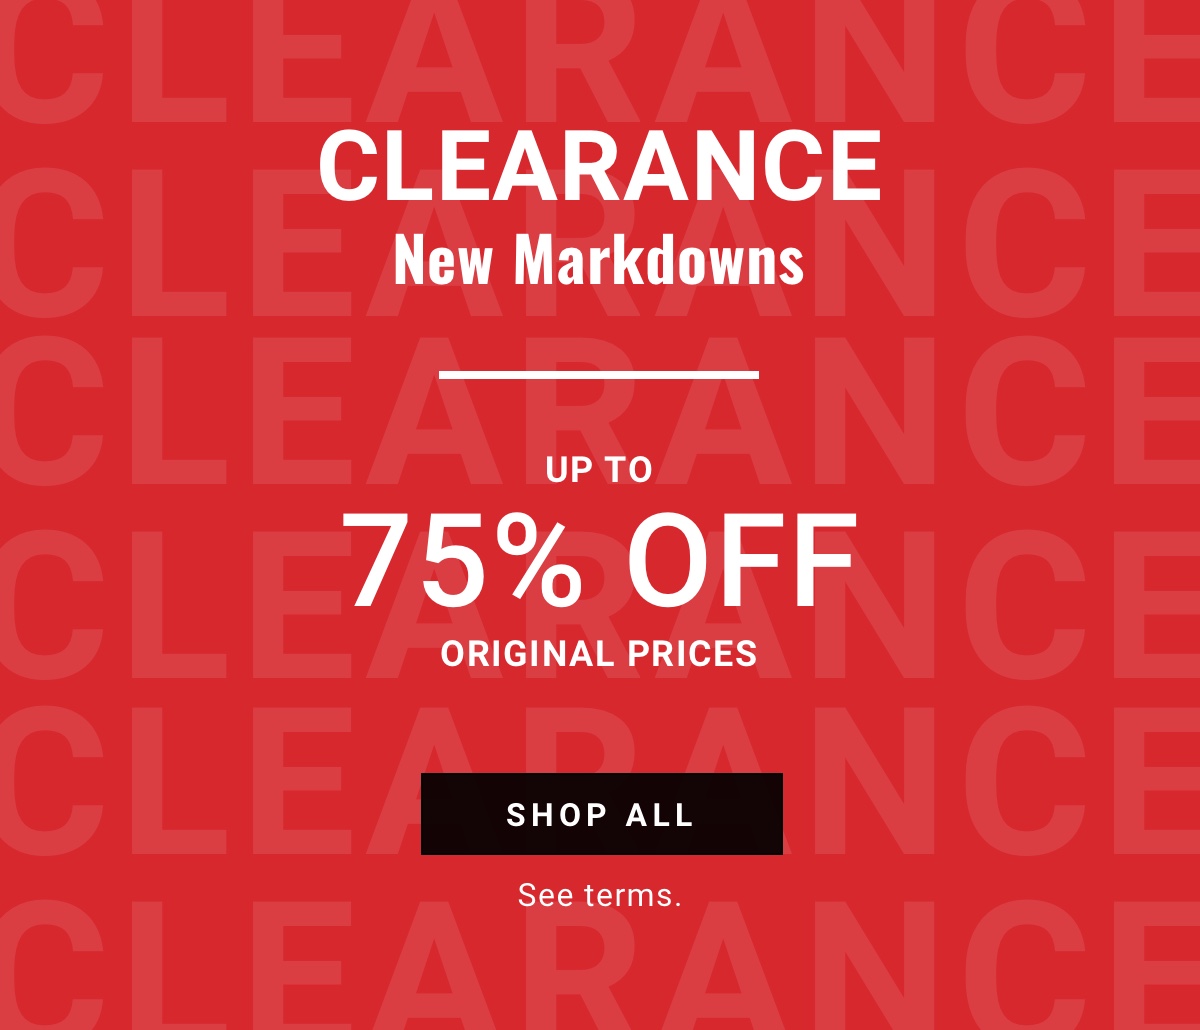 Clearance New Markdowns Up to 75 Percent Off Original Prices